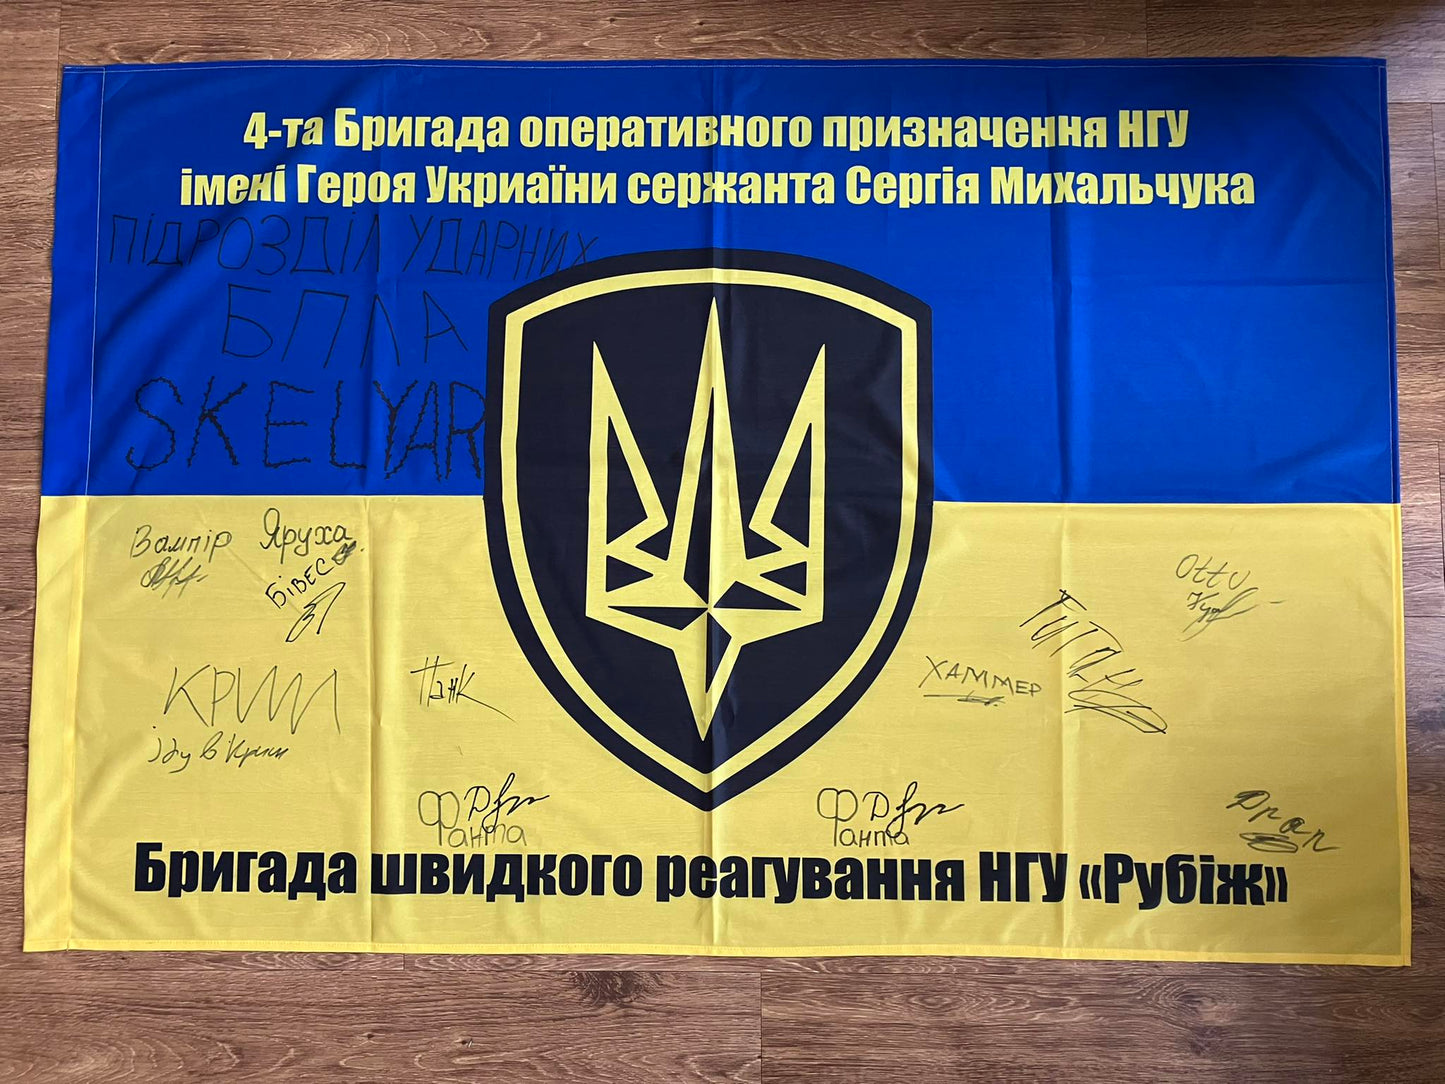 Donate to receive: Rubizh Brigade (with Signatures of the Warriors)